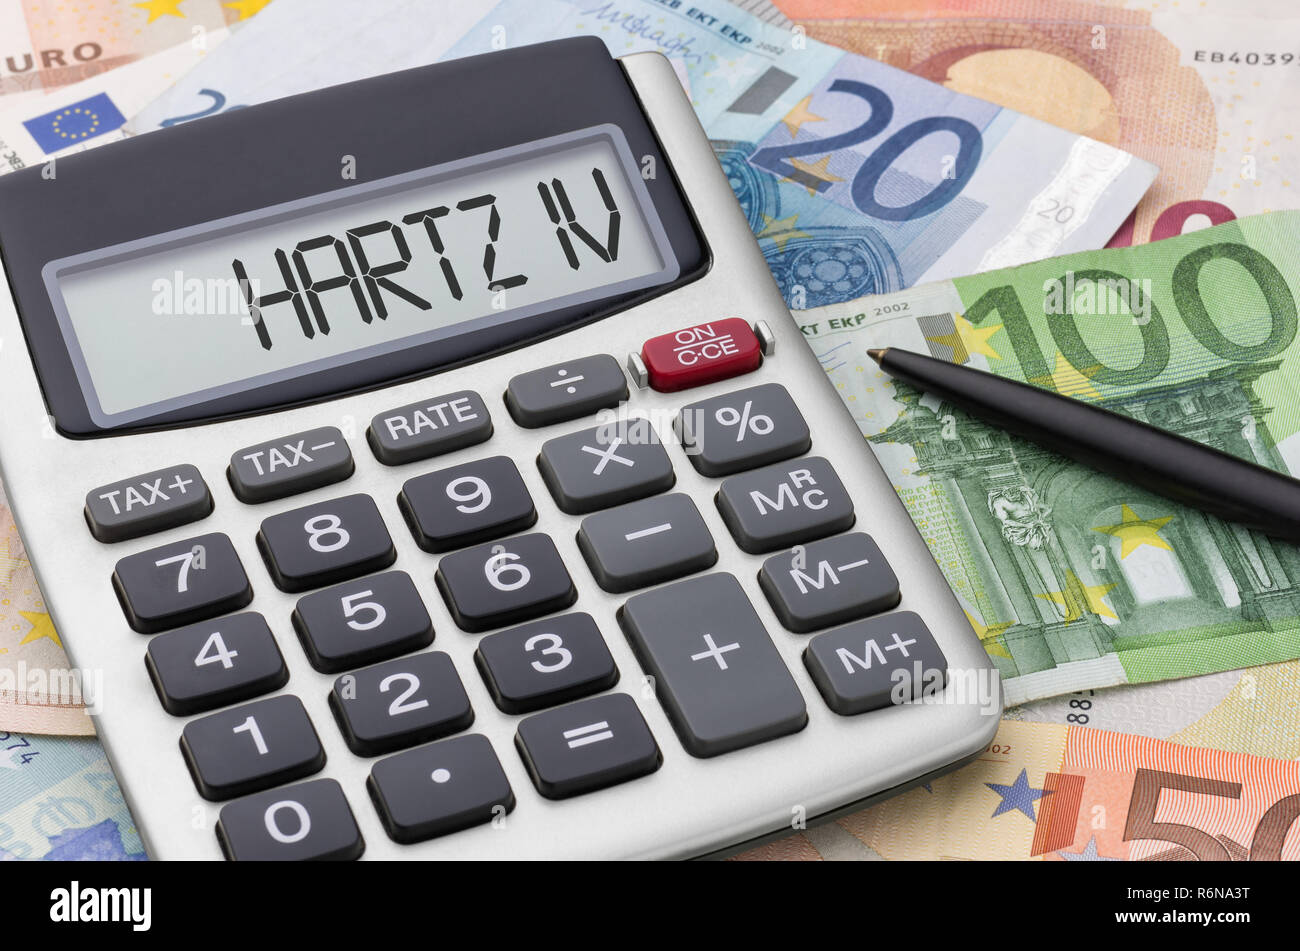 calculator with banknotes - hartz iv Stock Photo